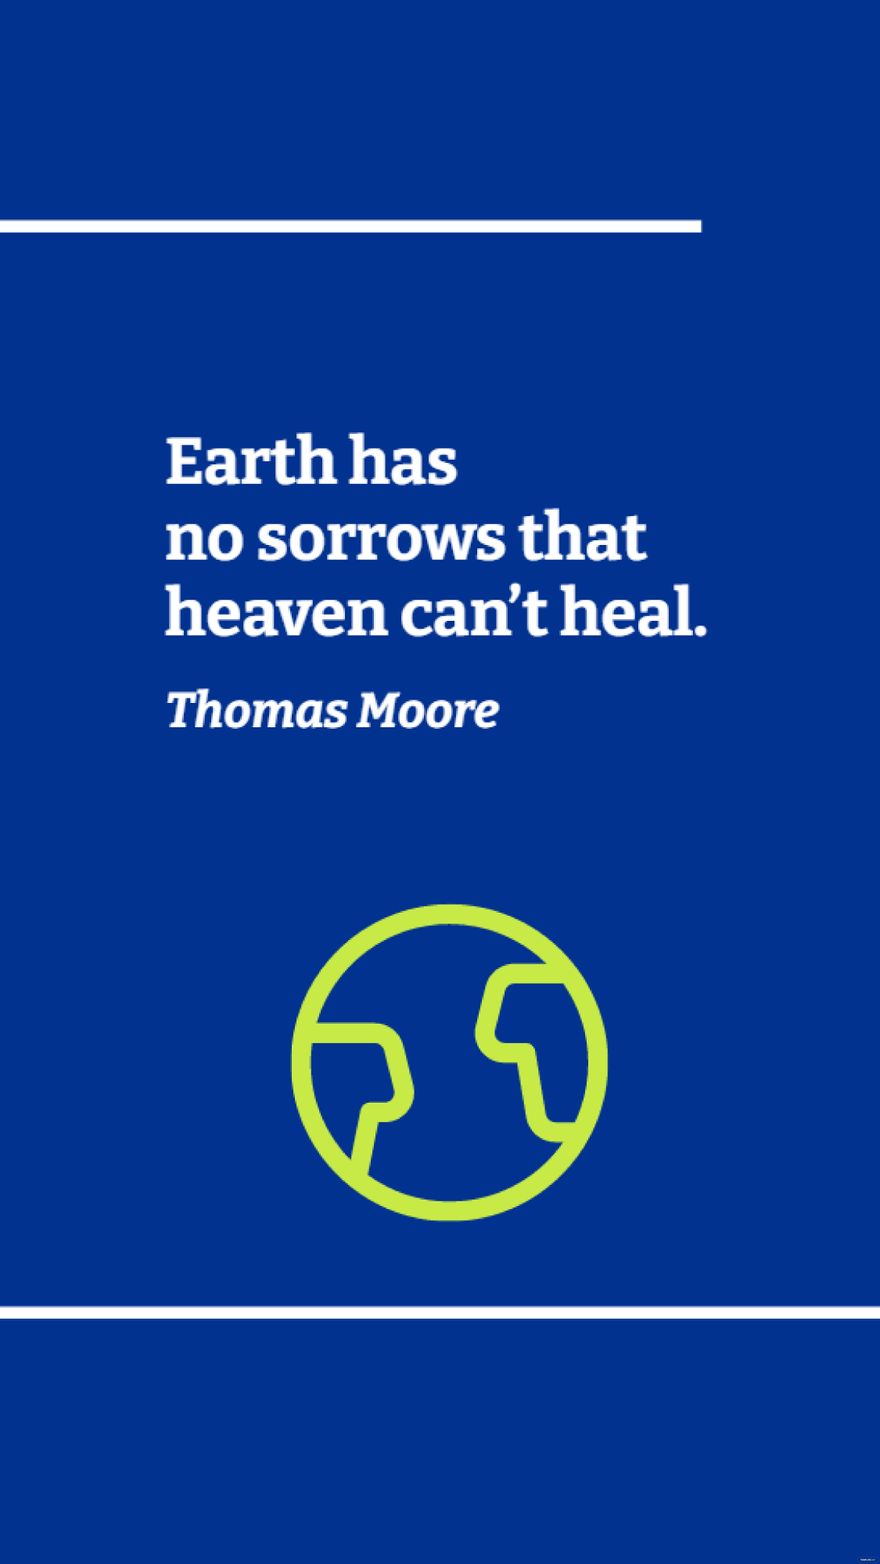 Free Thomas Moore - Earth has no sorrows that heaven can’t heal. in JPG